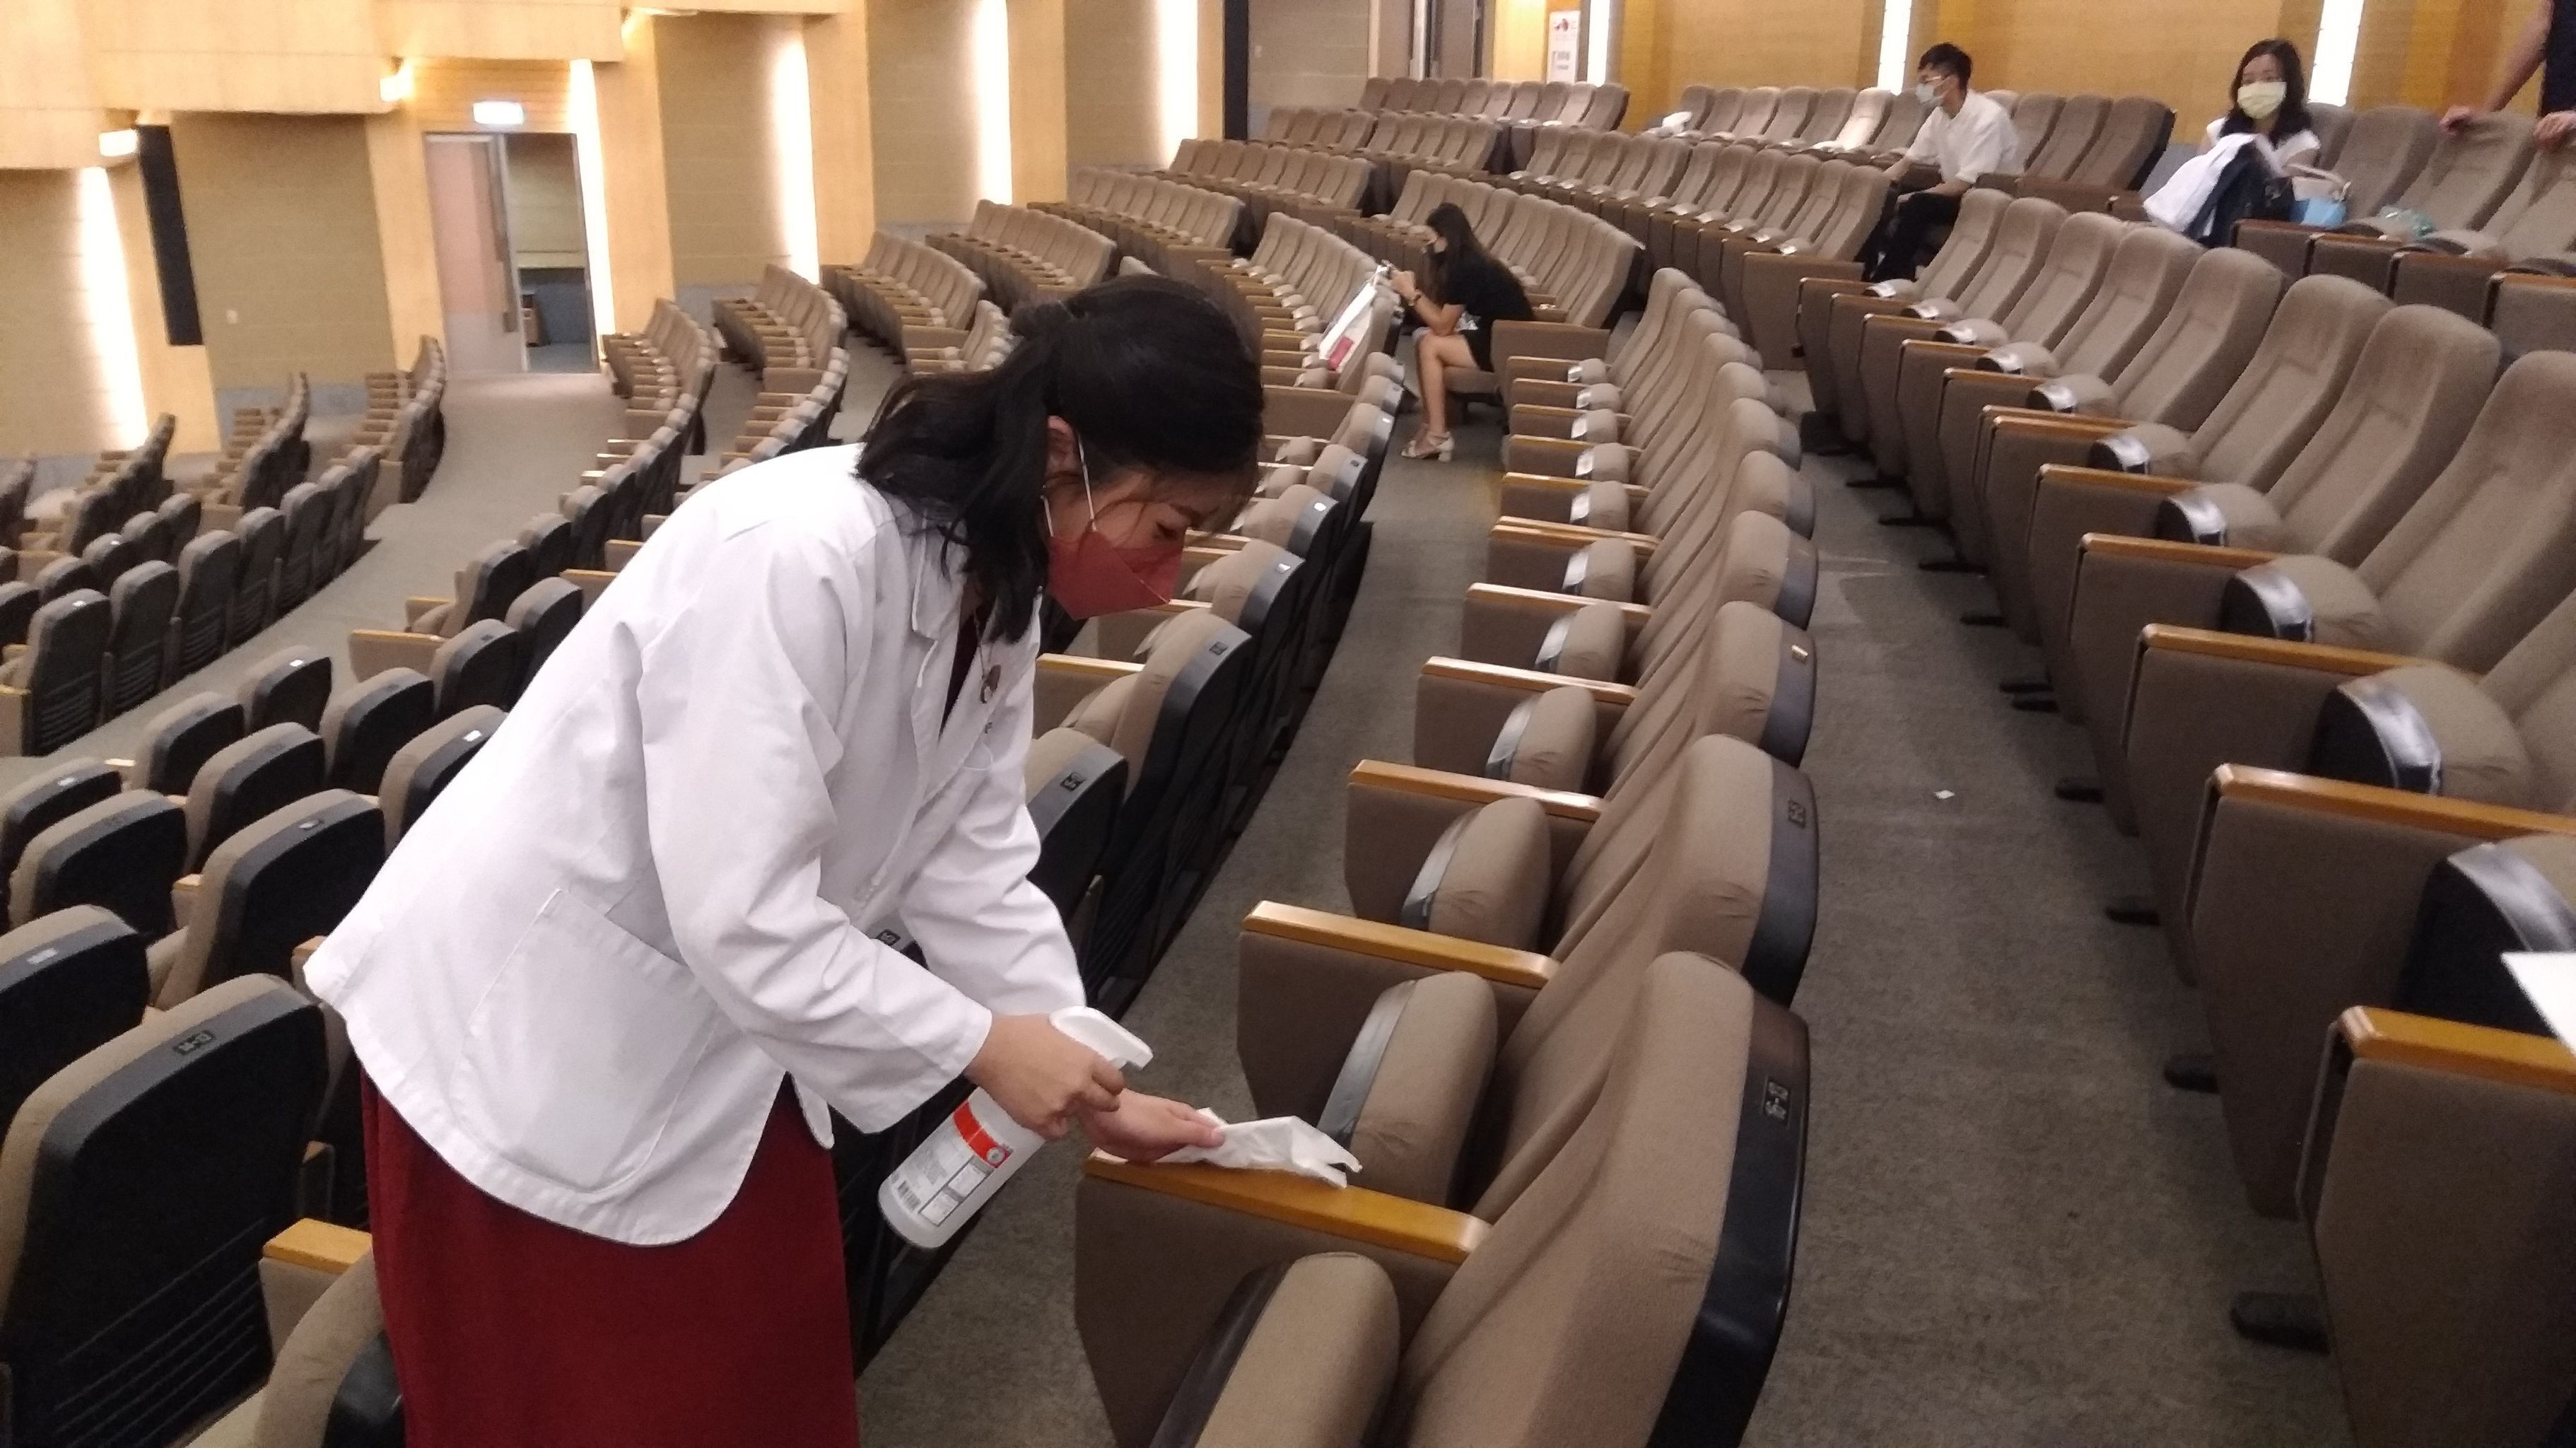 Each seat has been disinfected before the ceremony to protect the health of the participants.